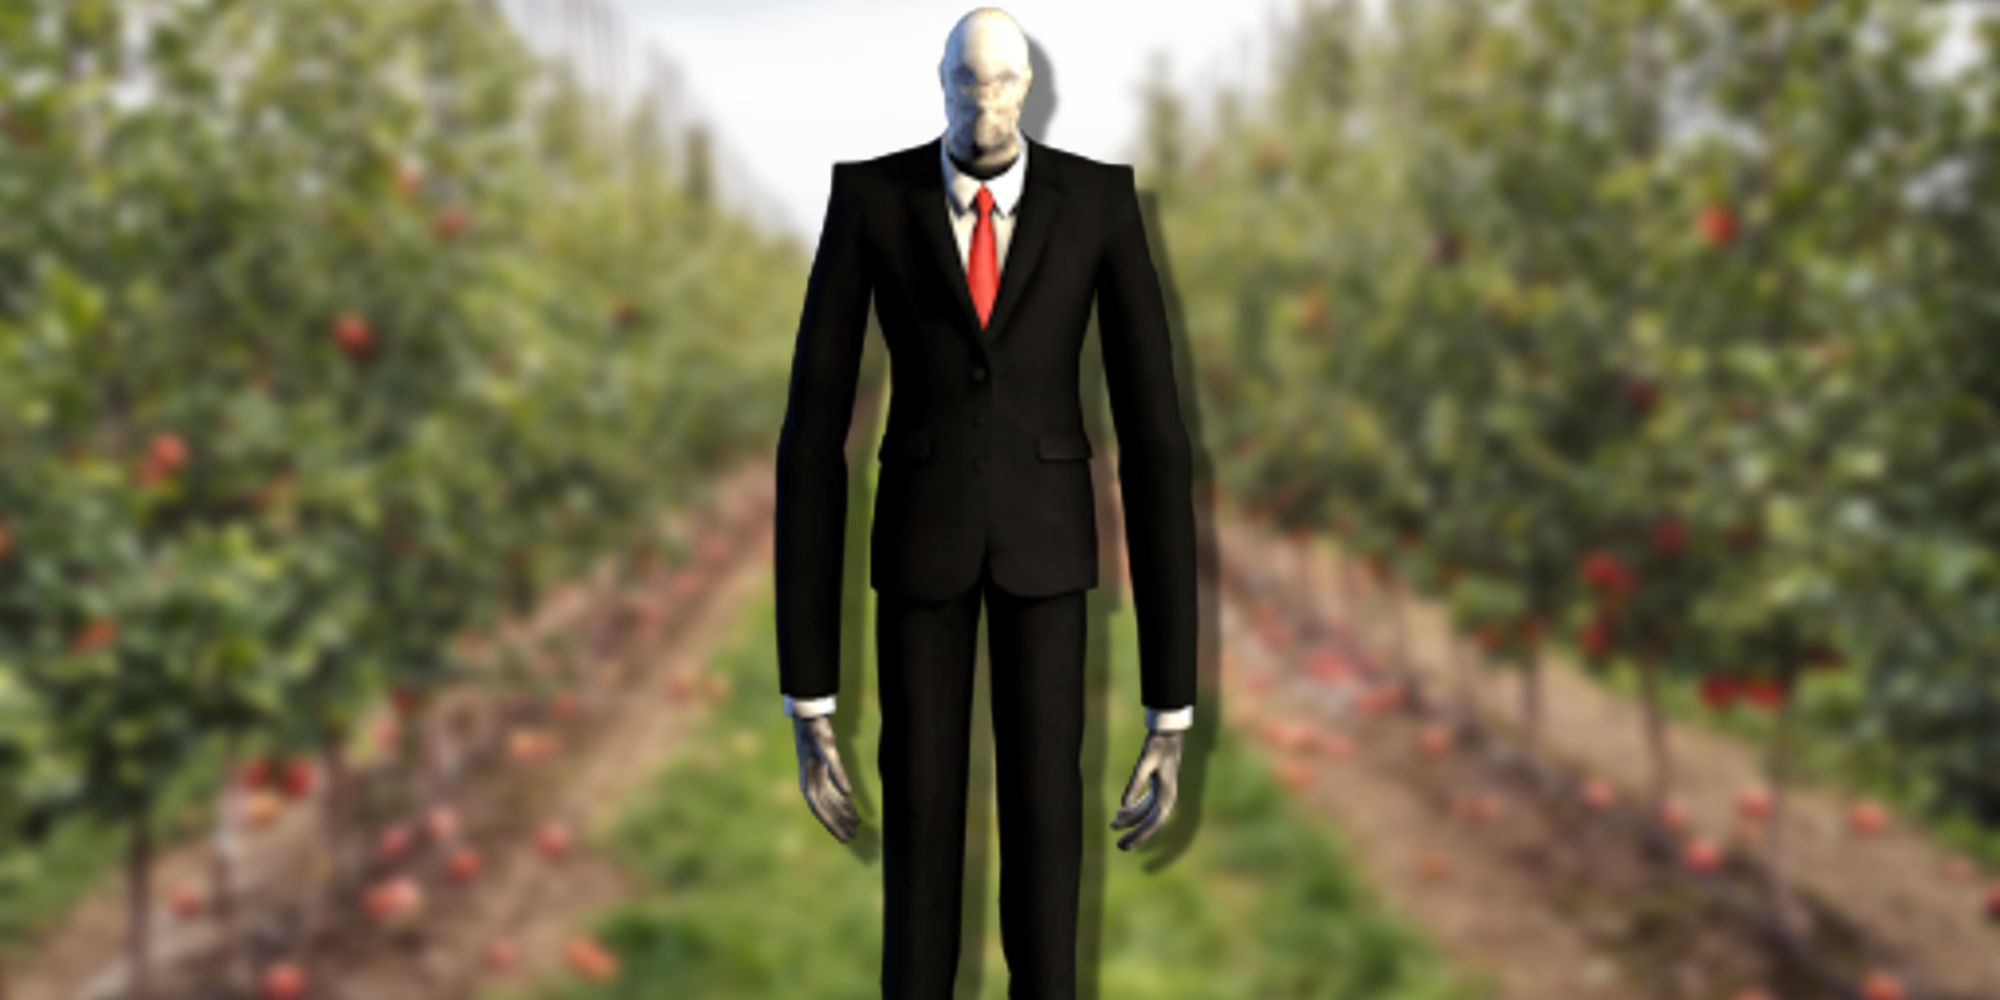 Fall Activities To Do With Horror Game Monsters Slenderman Slender the Arrival